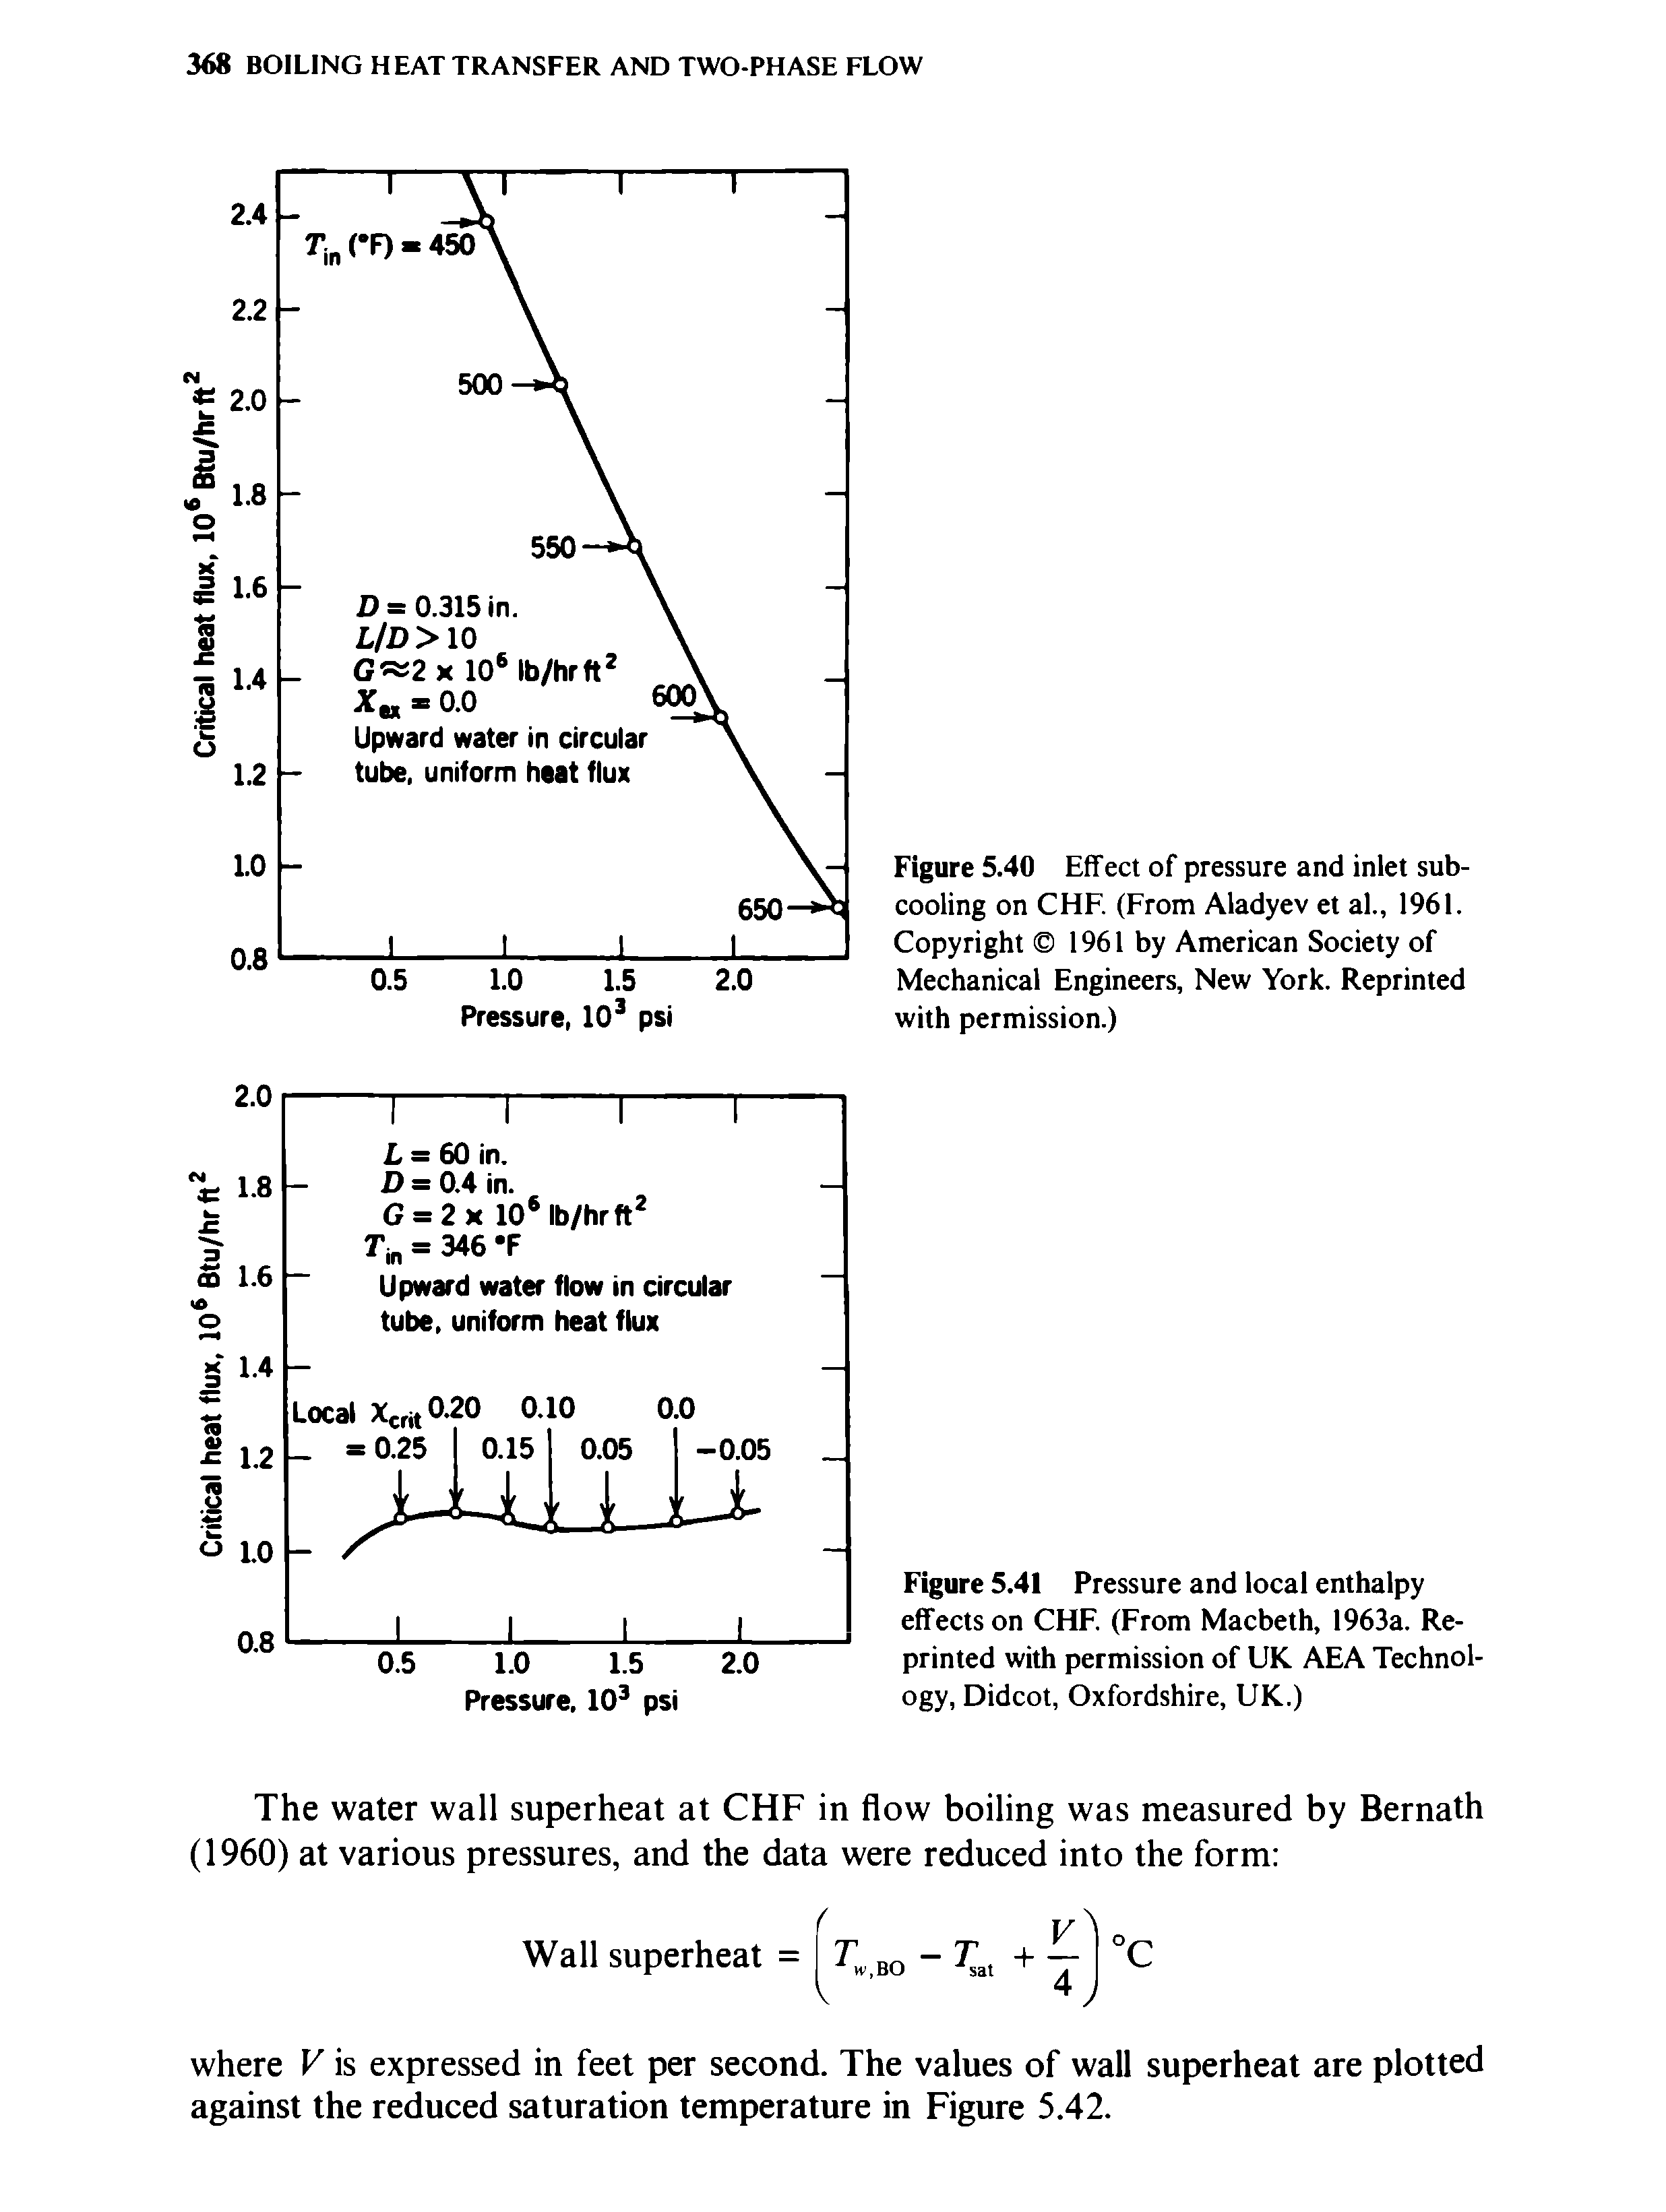 Figure 5.41 Pressure and local enthalpy effects on CHF. (From Macbeth, 1963a. Reprinted with permission of UK AEA Technology, Didcot, Oxfordshire, UK.)...